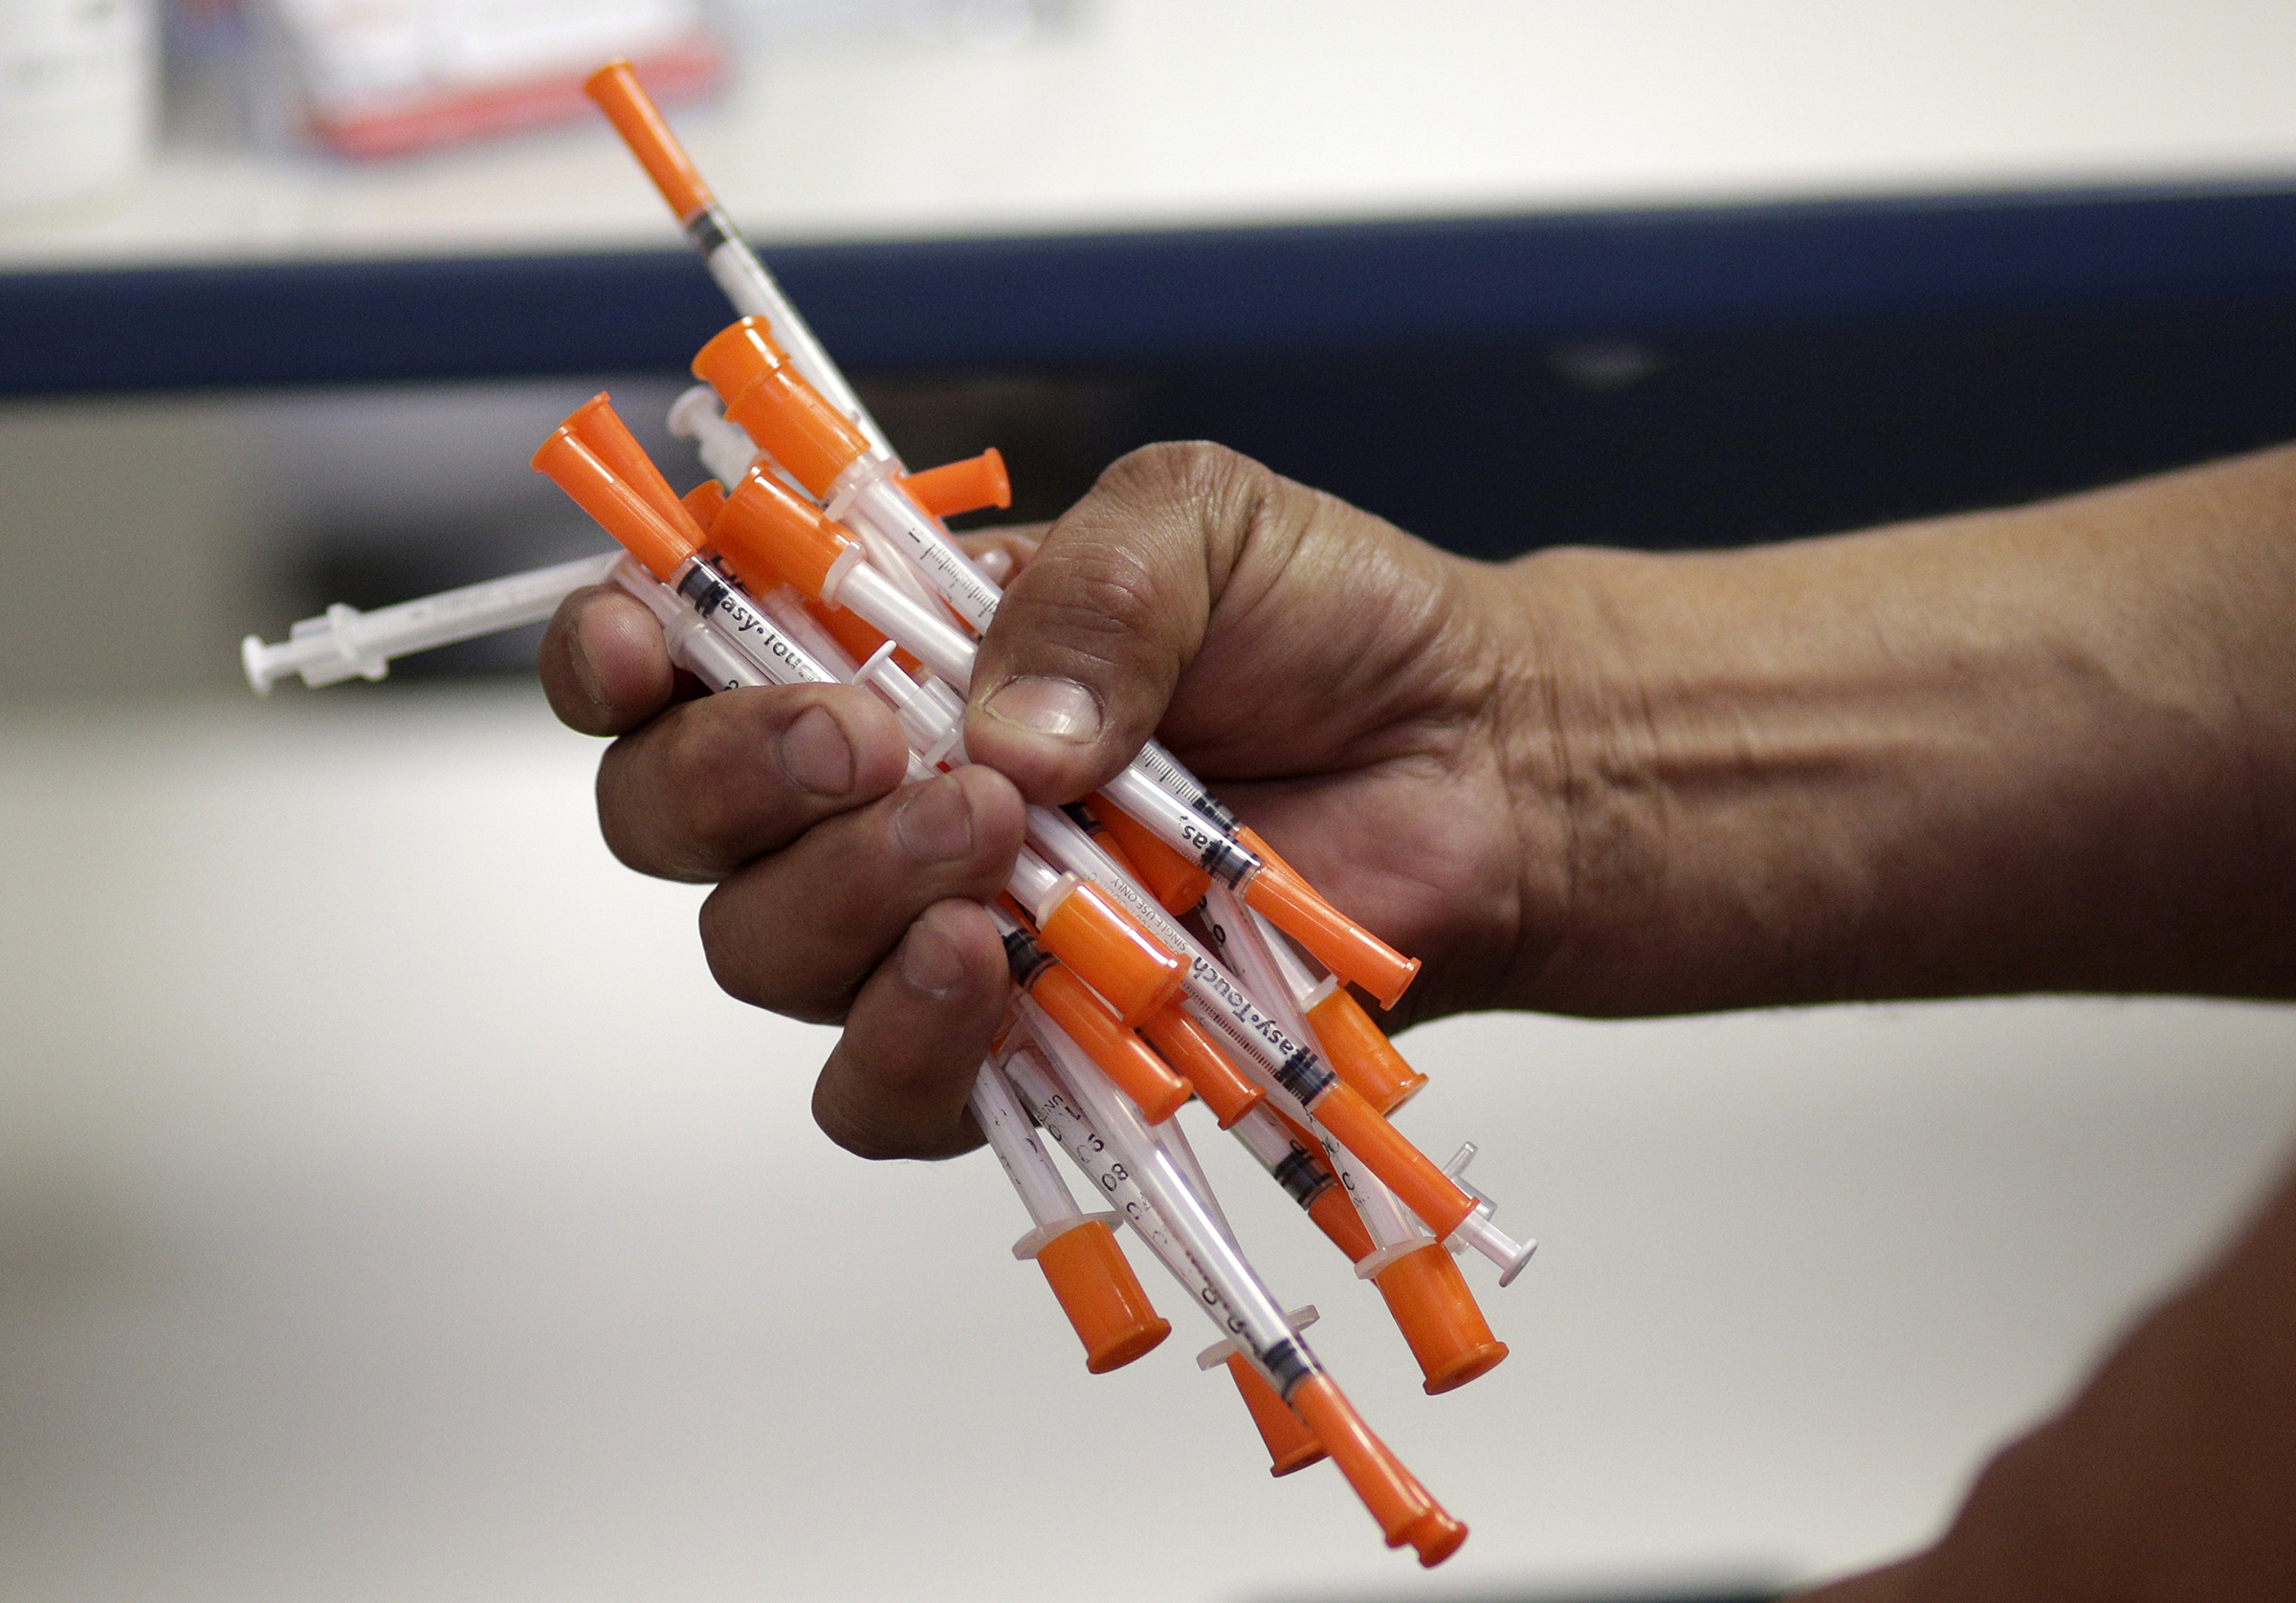 Jose Garcia, an injection drug user, deposits used needles into a container at the IDEA exchange, in Miami on May 6, 2019. (Lynne Sladky—AP)